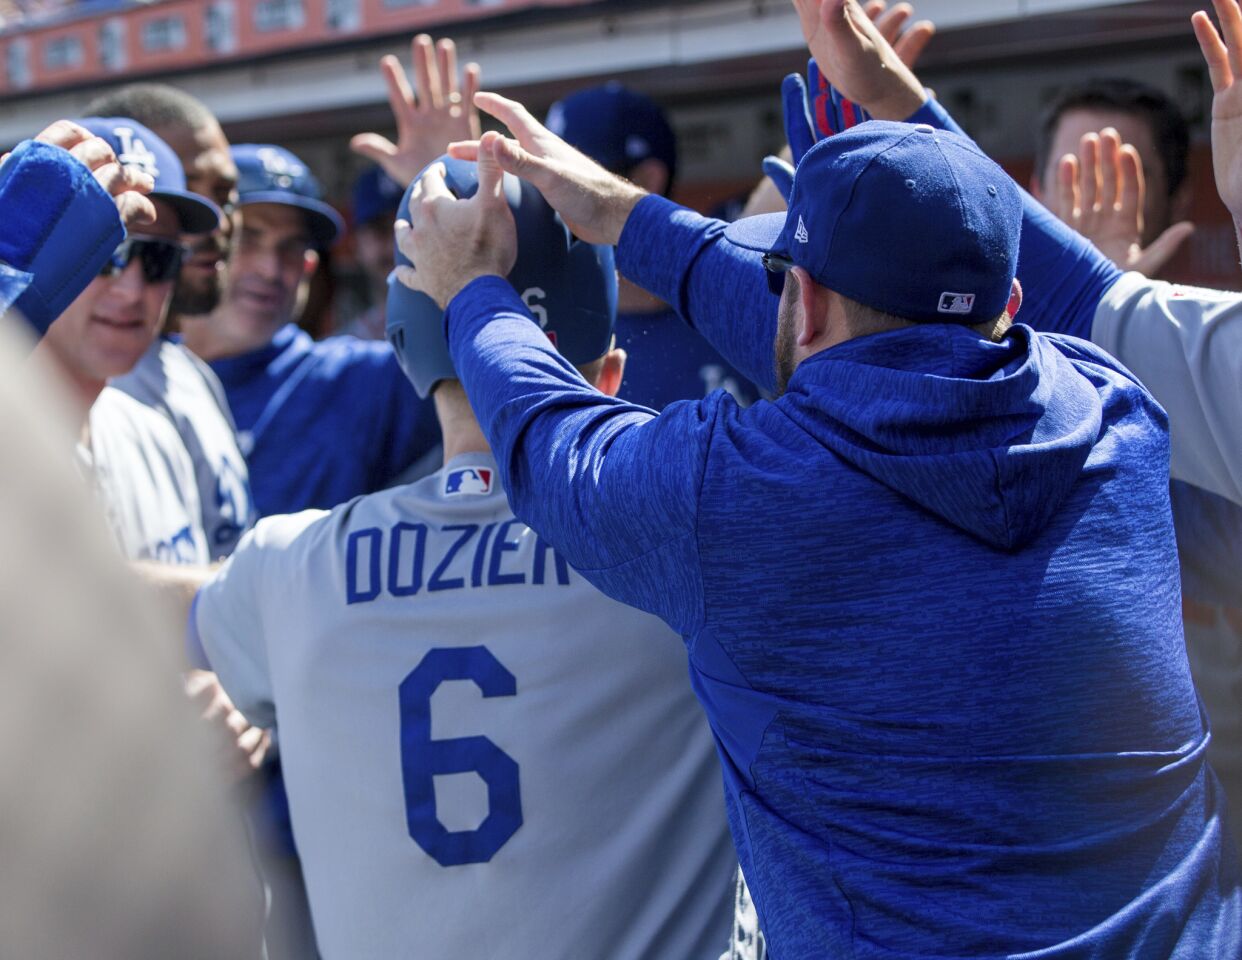 Los Angeles Dodgers Brian Dozier, #6, celebrates after he hit a two-run homer against the San Francisco Giants in the third inning of a baseball game in San Francisco, Sunday, Sept. 30, 2018.